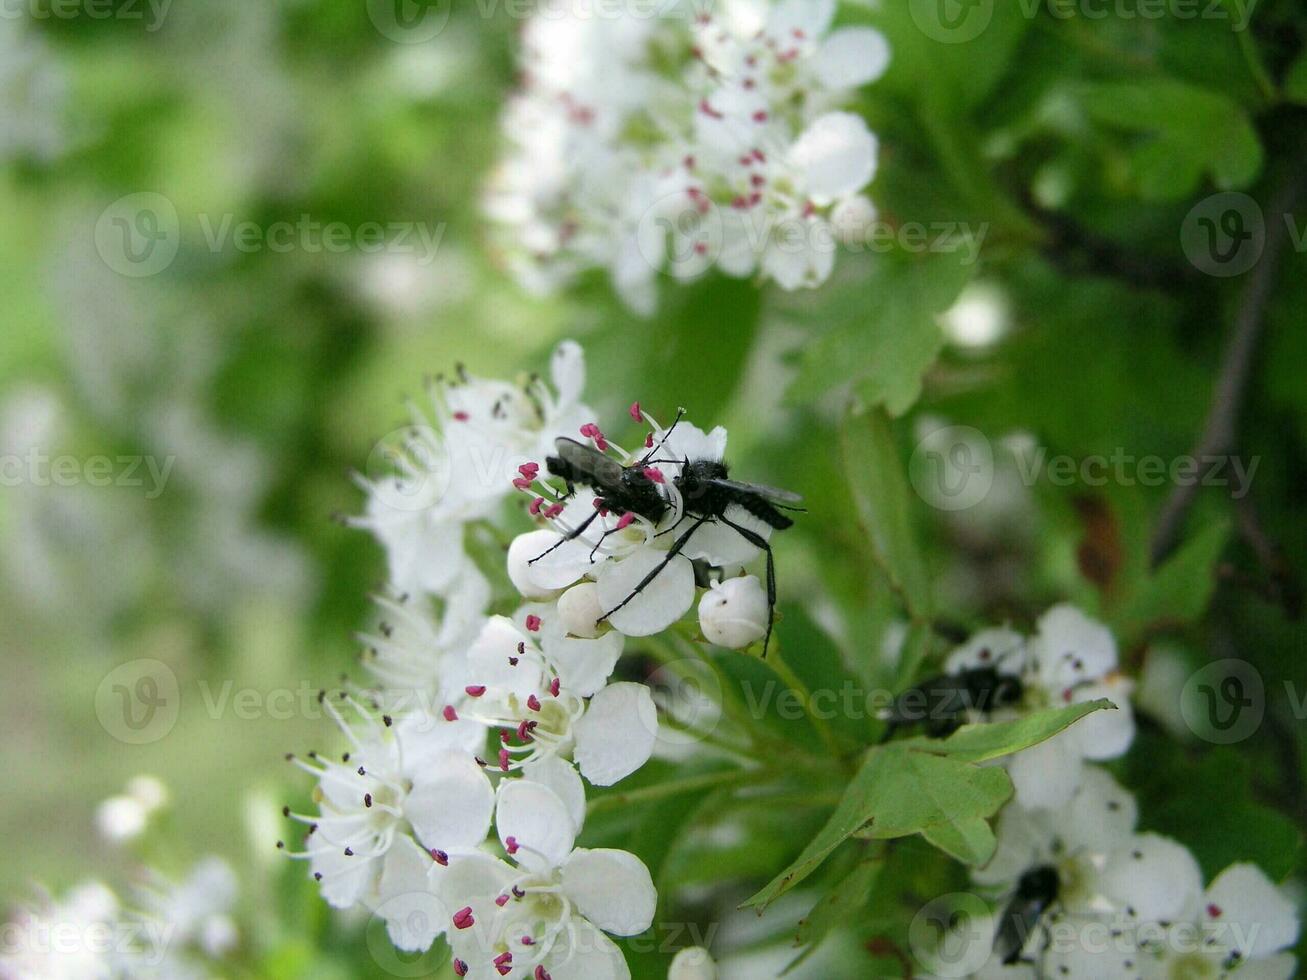 A Bibionidae March flies and lovebugs collects nectar from the photo